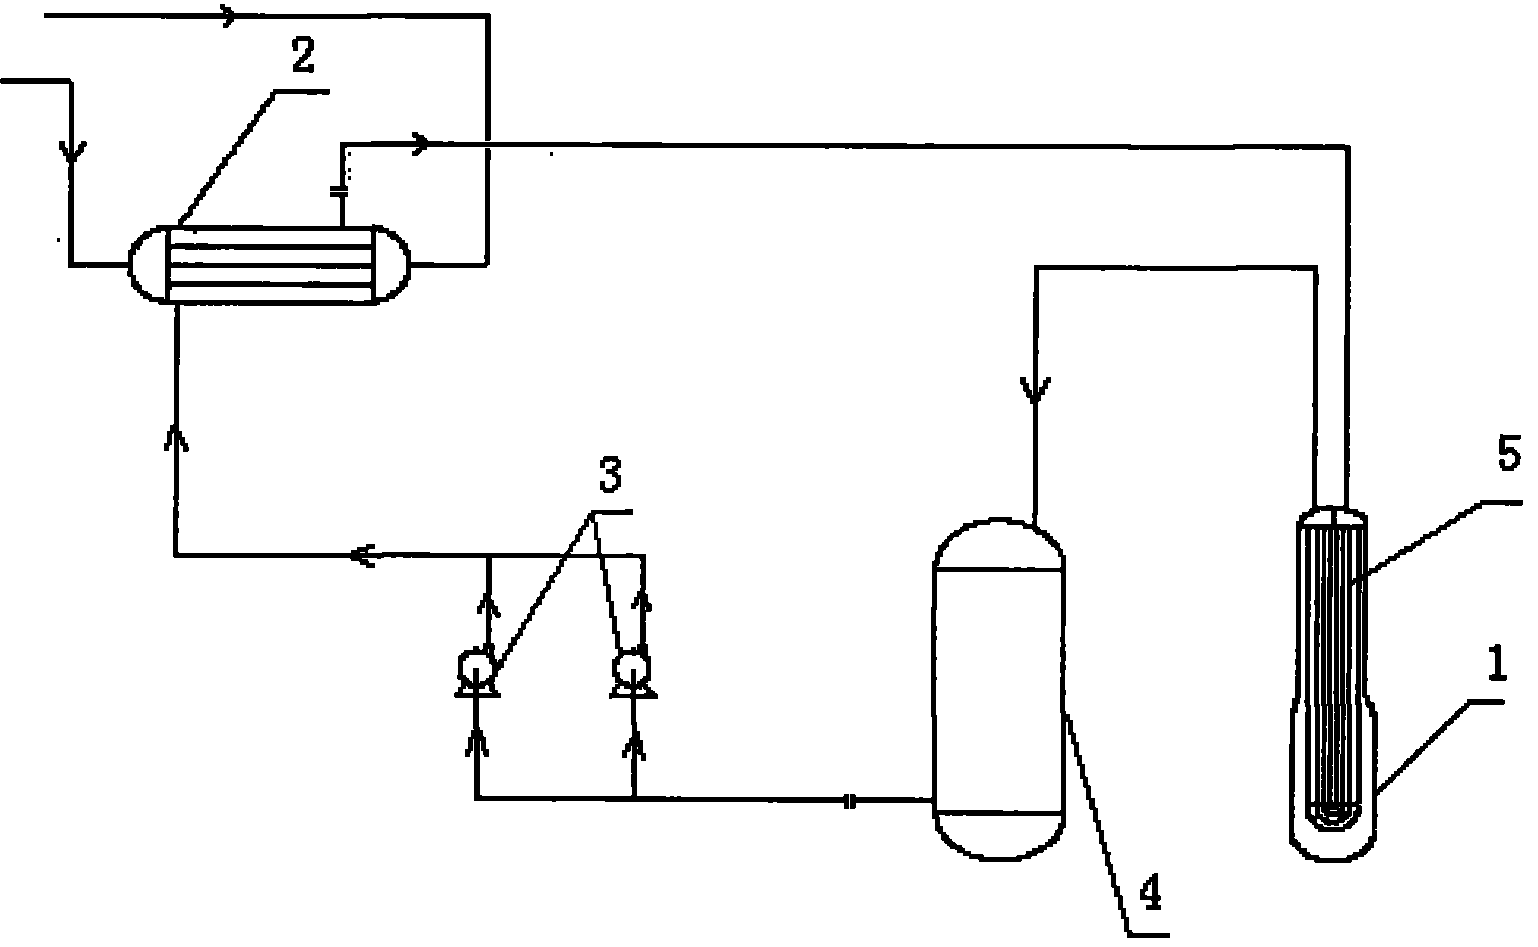 Synthesis of DMF and device